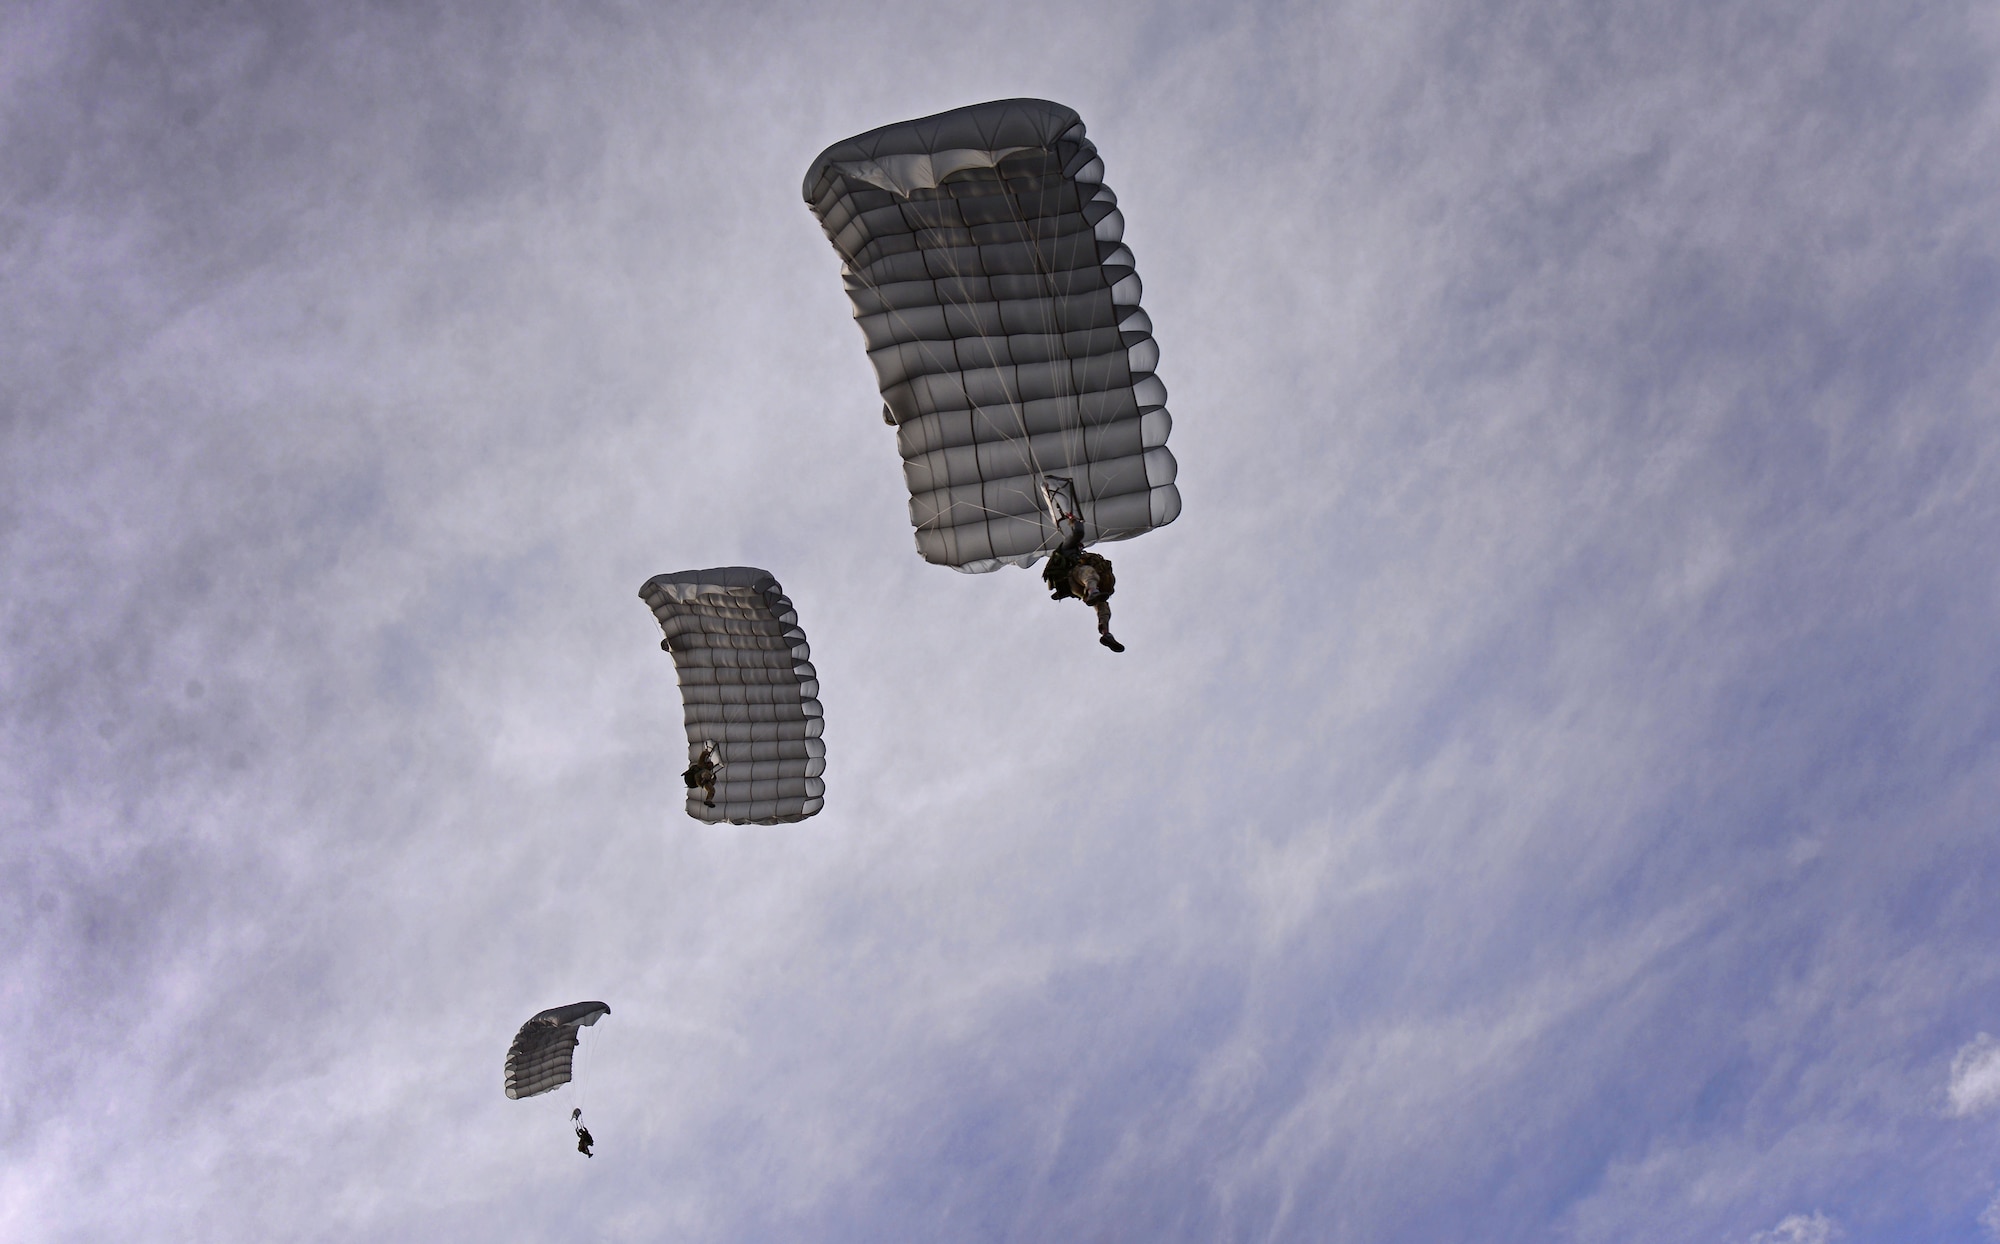 Three members of the 26th Special Tactics Squadron parachute down over the flightline March 25, 2016, at Cannon Air Force Base, N.M. Air Commandos with the 26th STS performed routine practice jumps as part of maintaining operational readiness. (U.S. Air Force photo/Staff Sgt. Alexx Pons) 